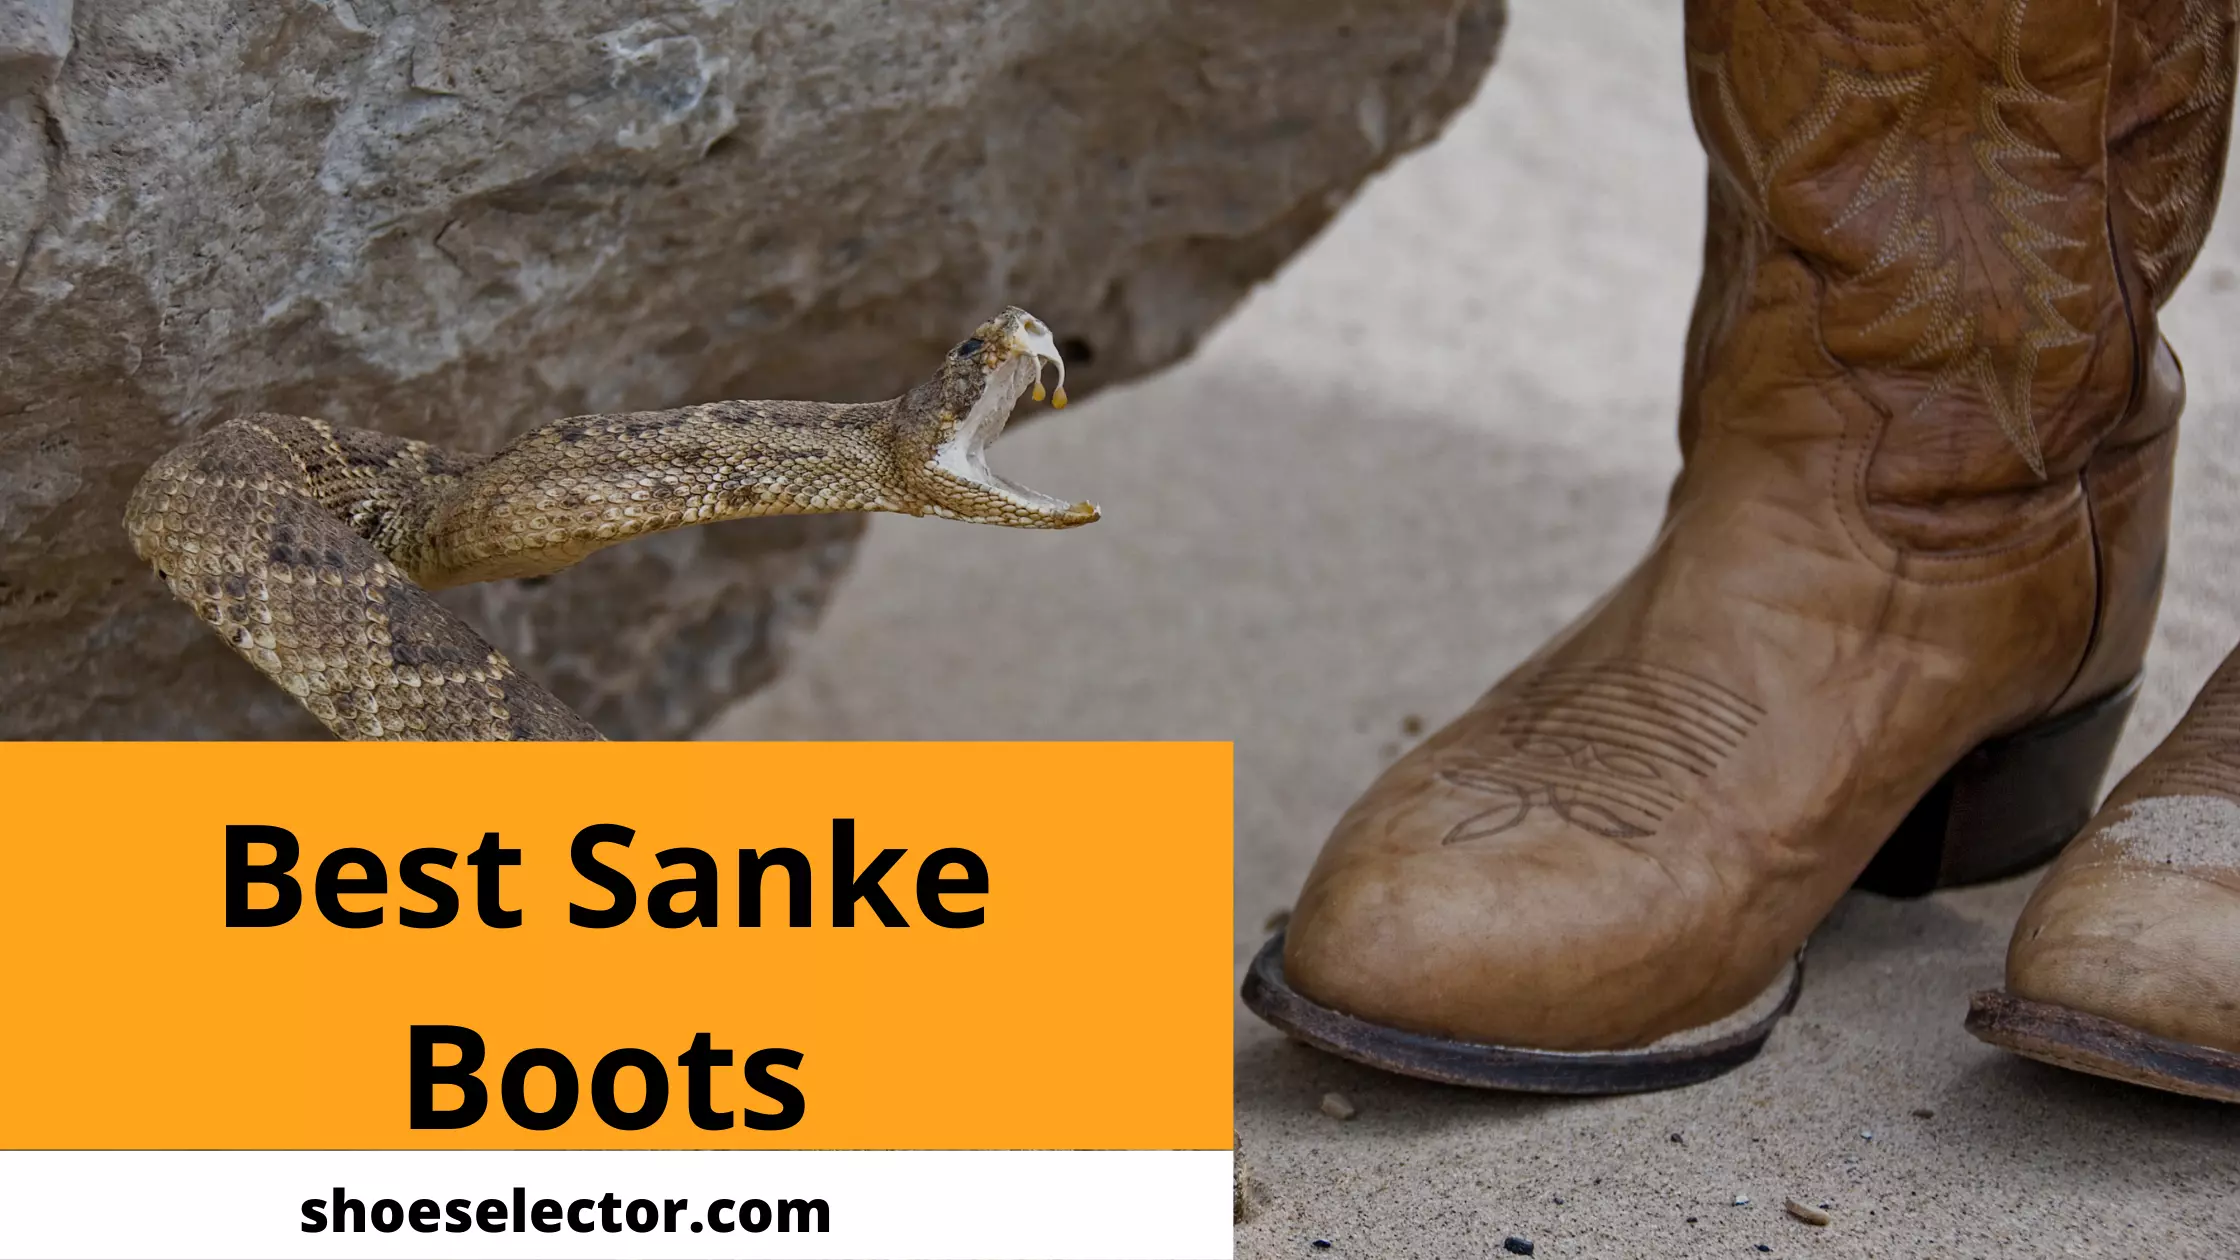 Best Snake Boots - Recommended Guide By Experts